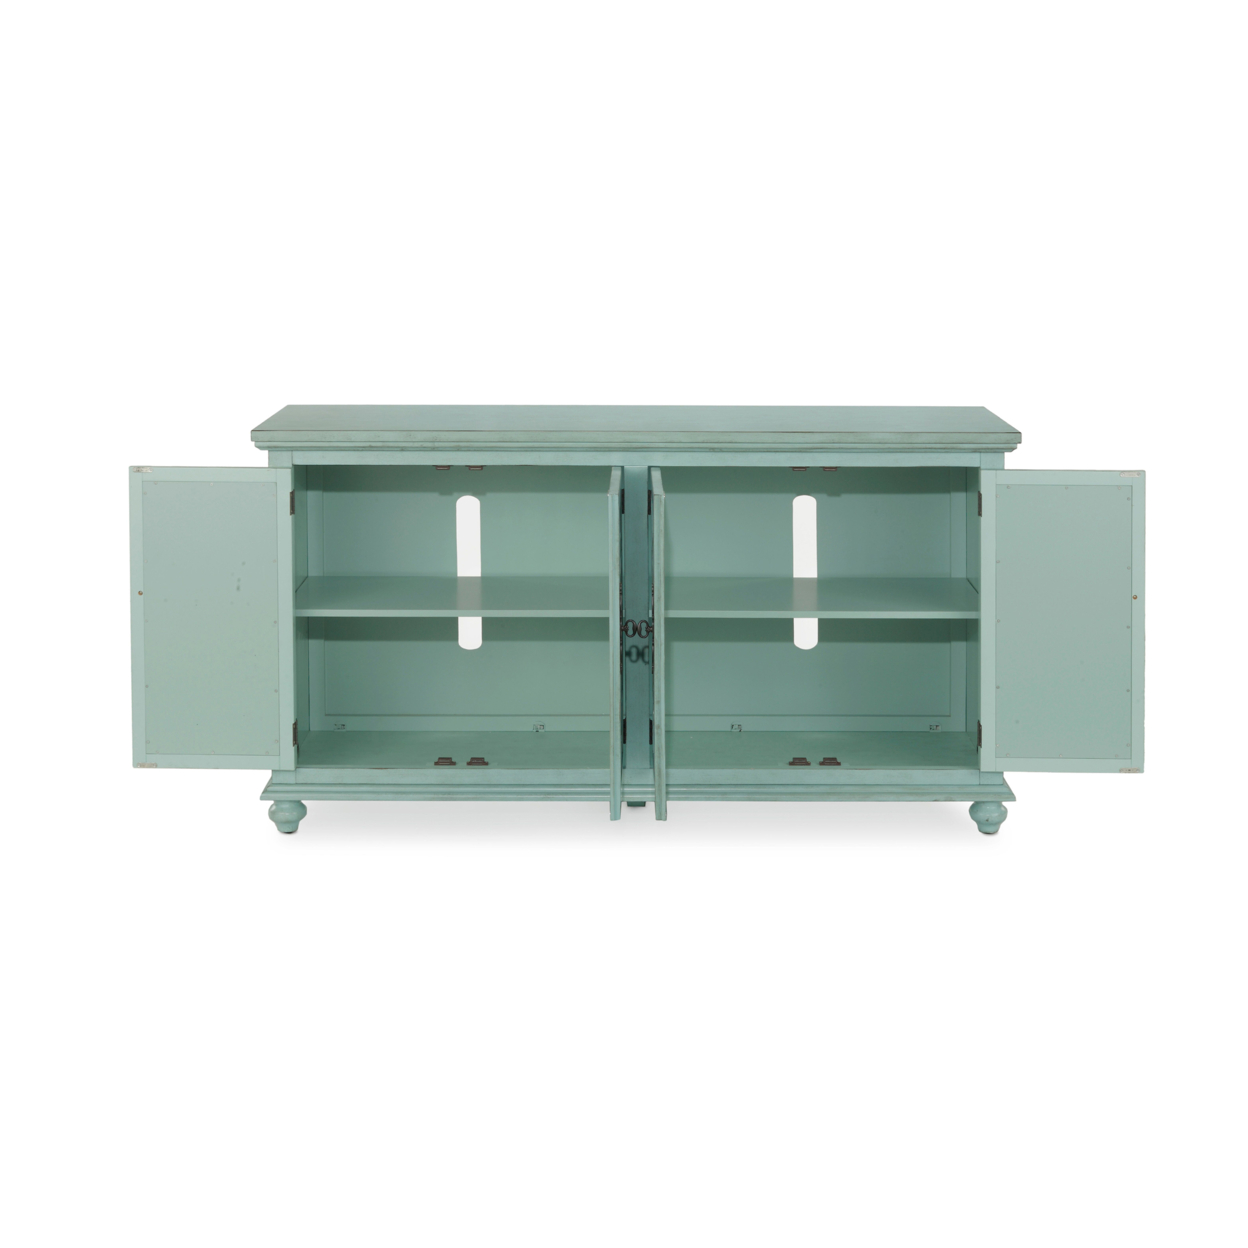 Trellis Front Wood And Glass TV Stand With Cabinet Storage, Mint Green- Saltoro Sherpi